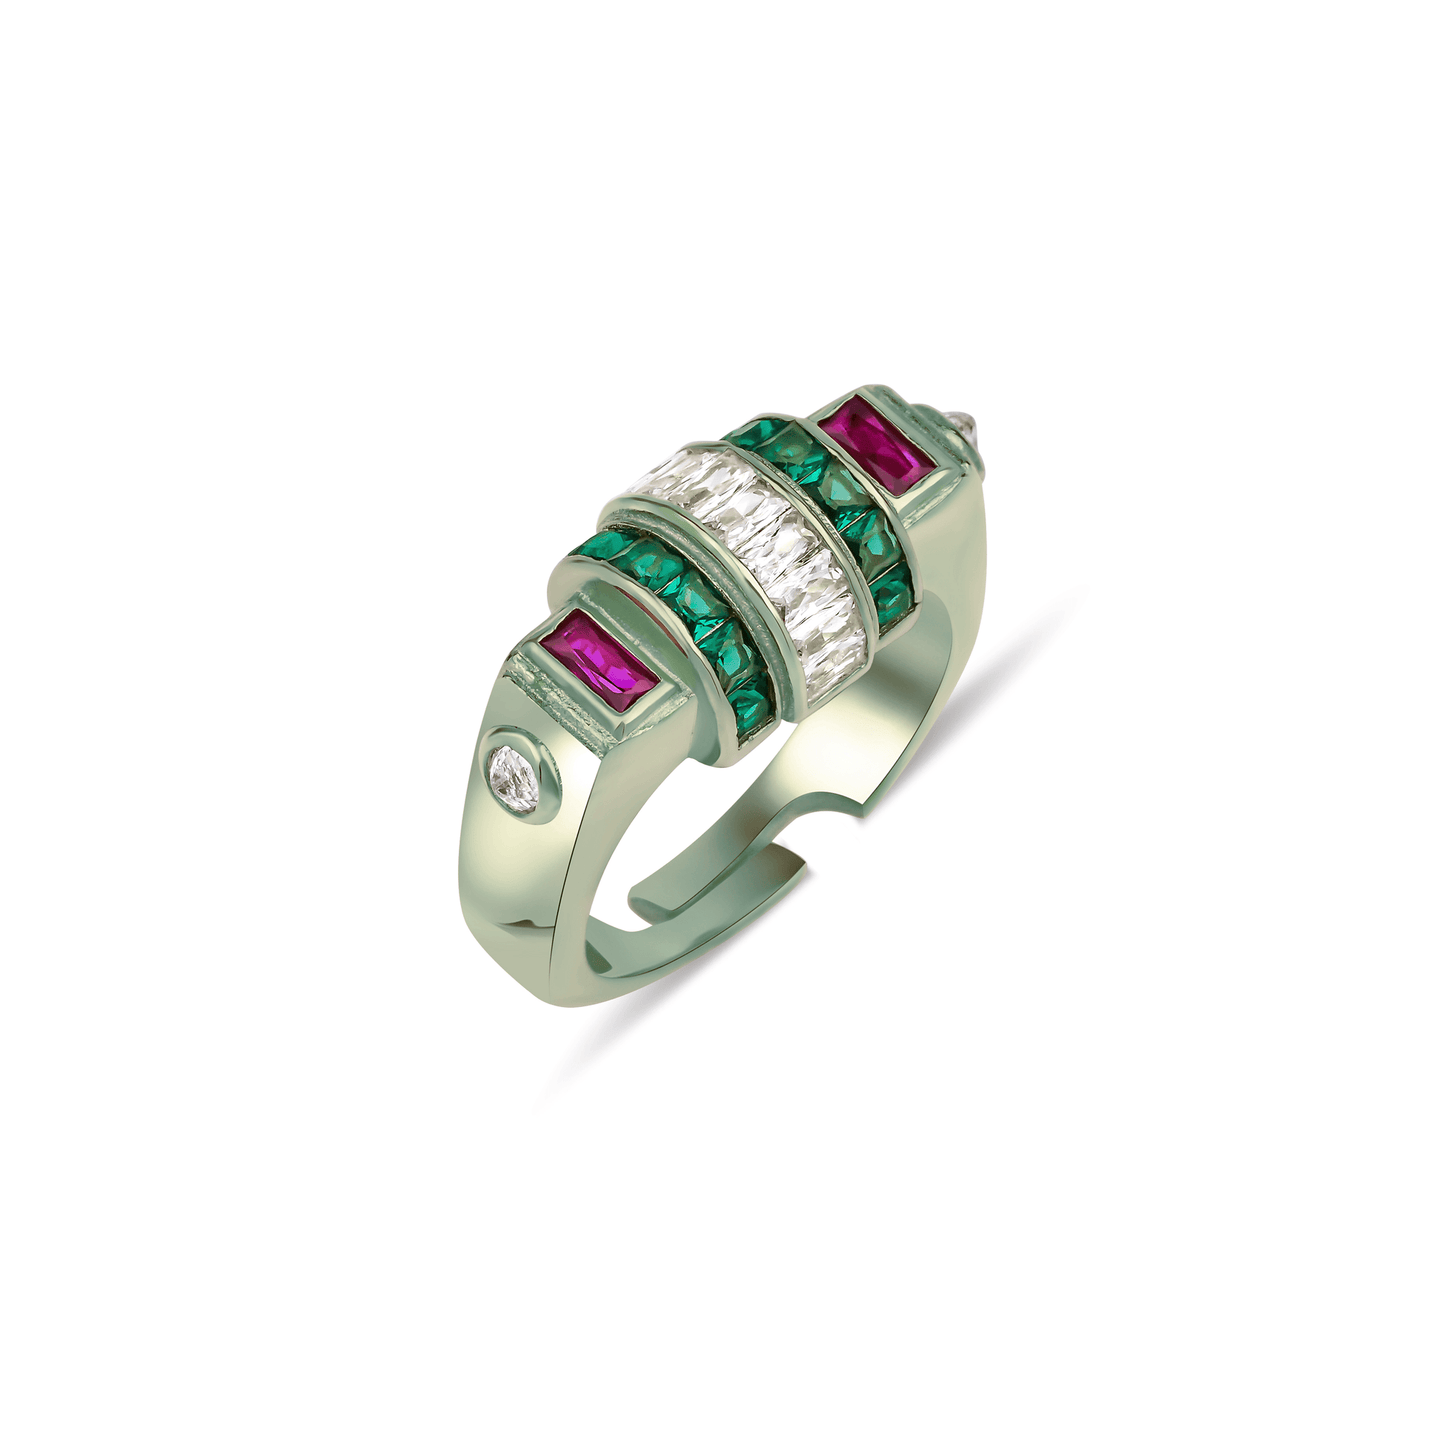 Adjustable Silver Ring with Colored Stones